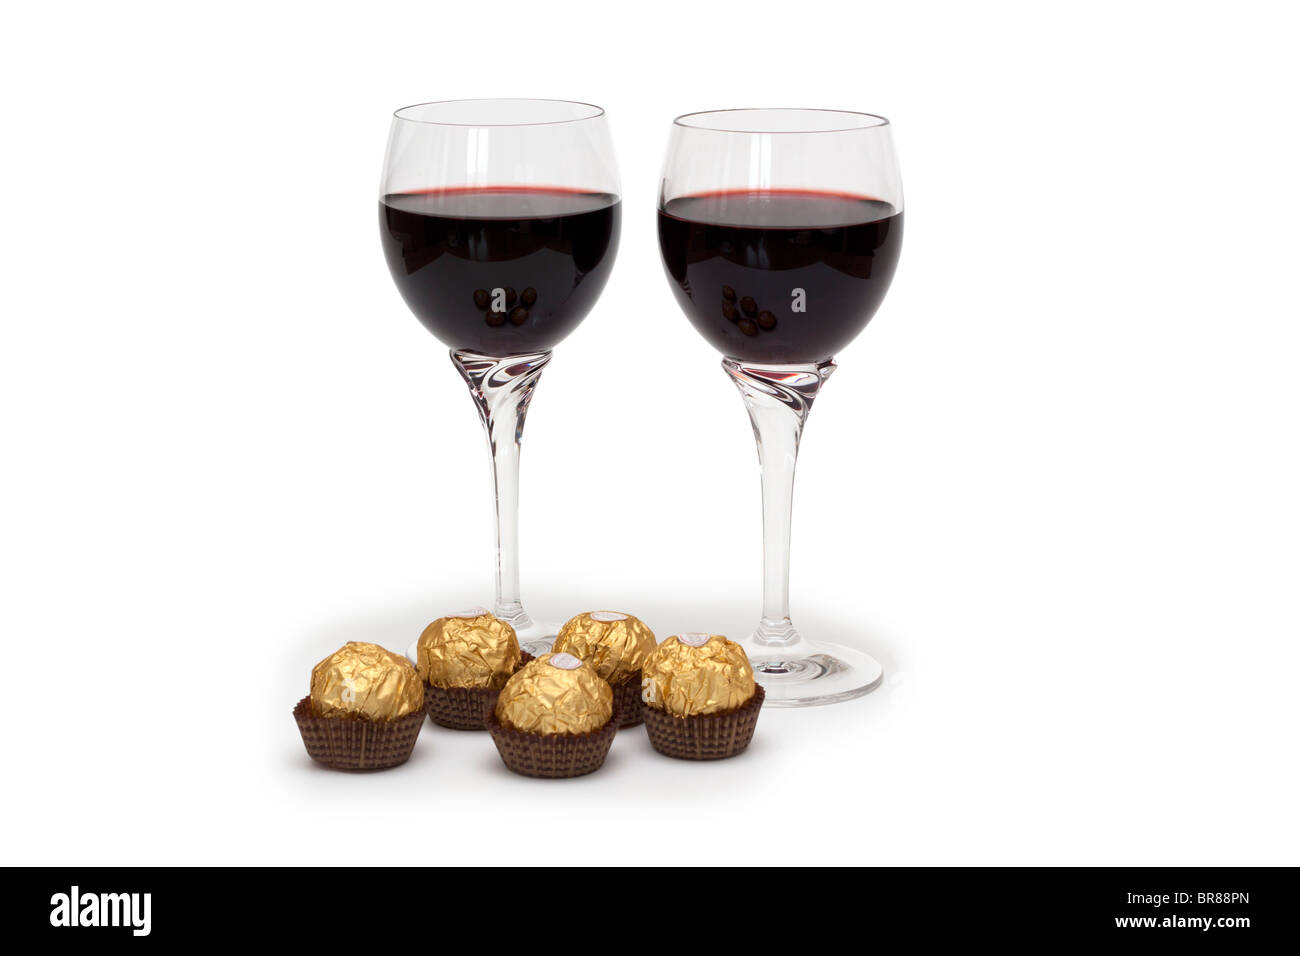 Two glasses of red wine with foil wrapped chocolates Stock Photo